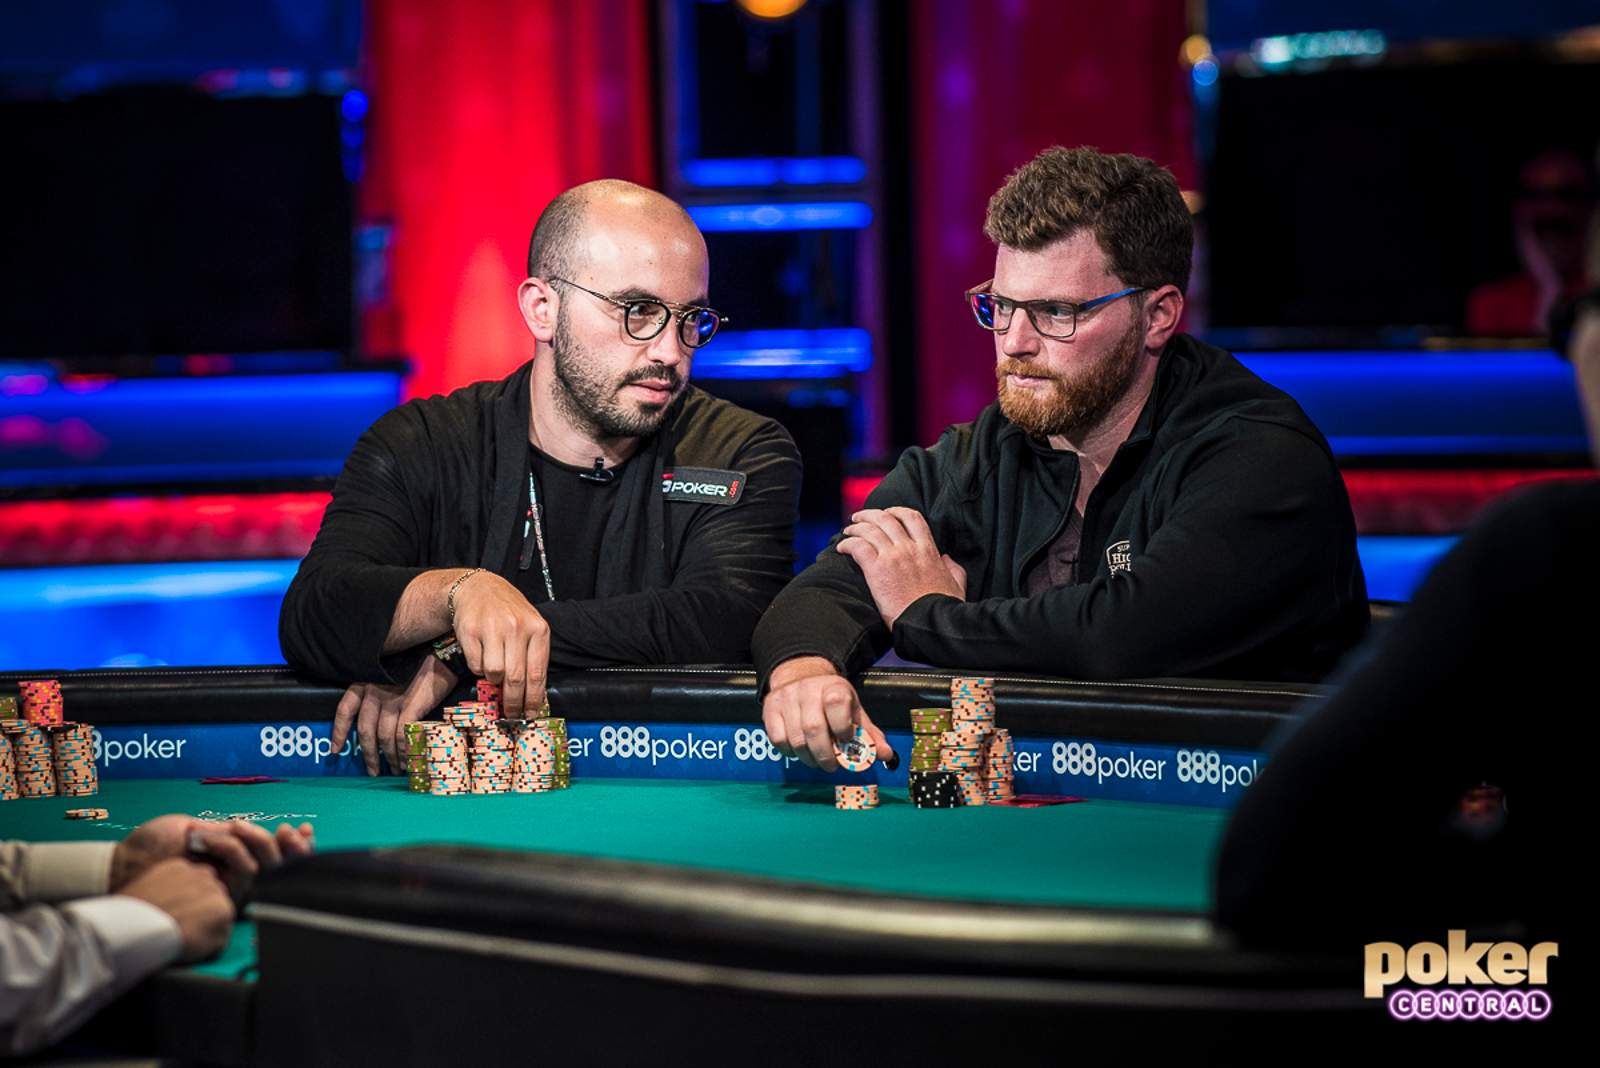 Weekend Binge Watch: A Clash of High Rollers at the WSOP